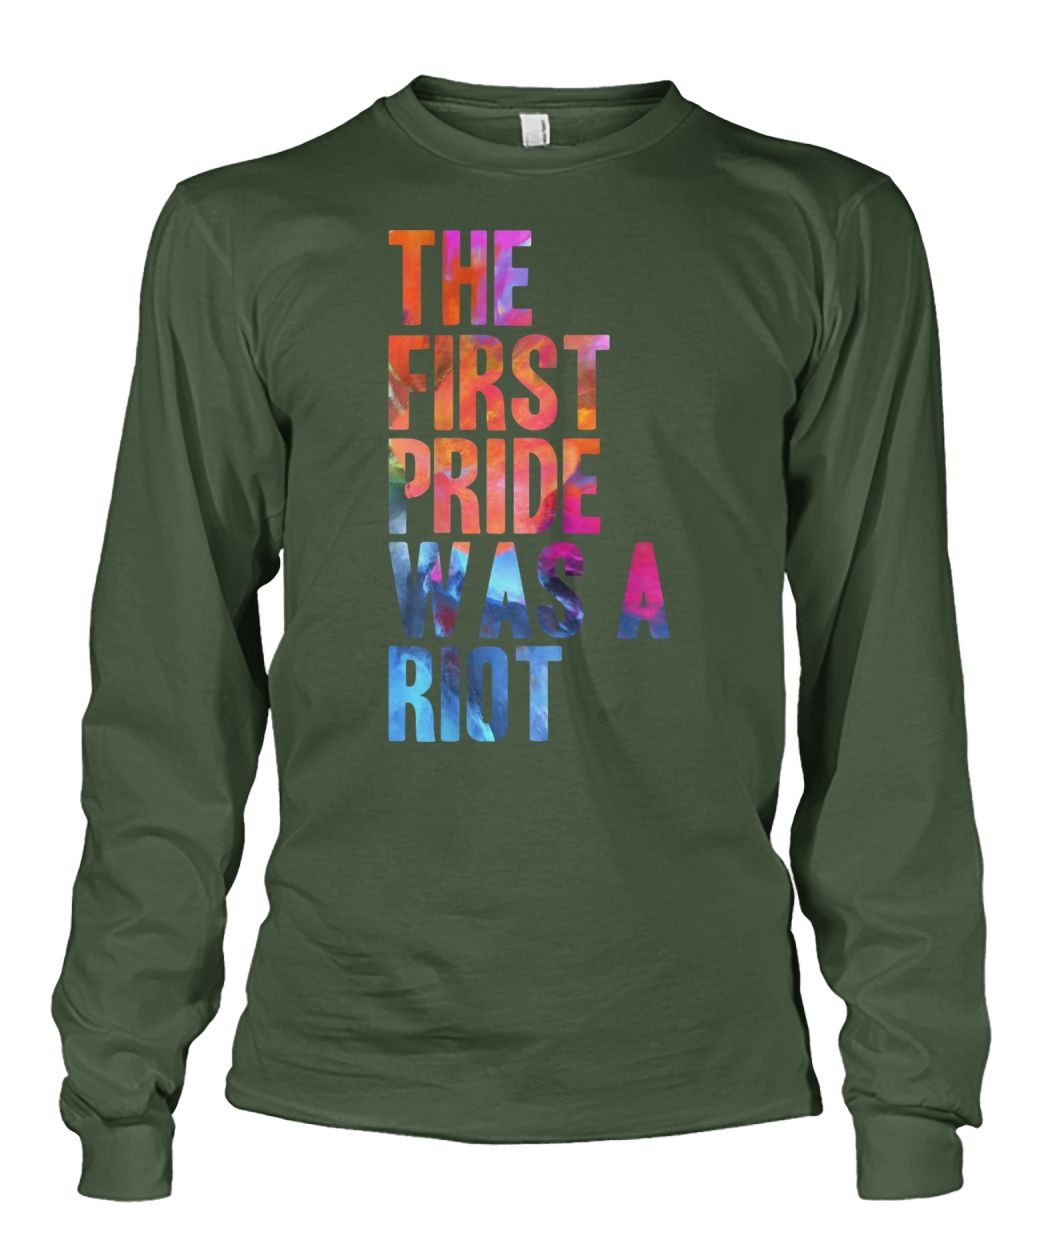 The first gay pride was a riot for lgbt pride unisex long sleeve